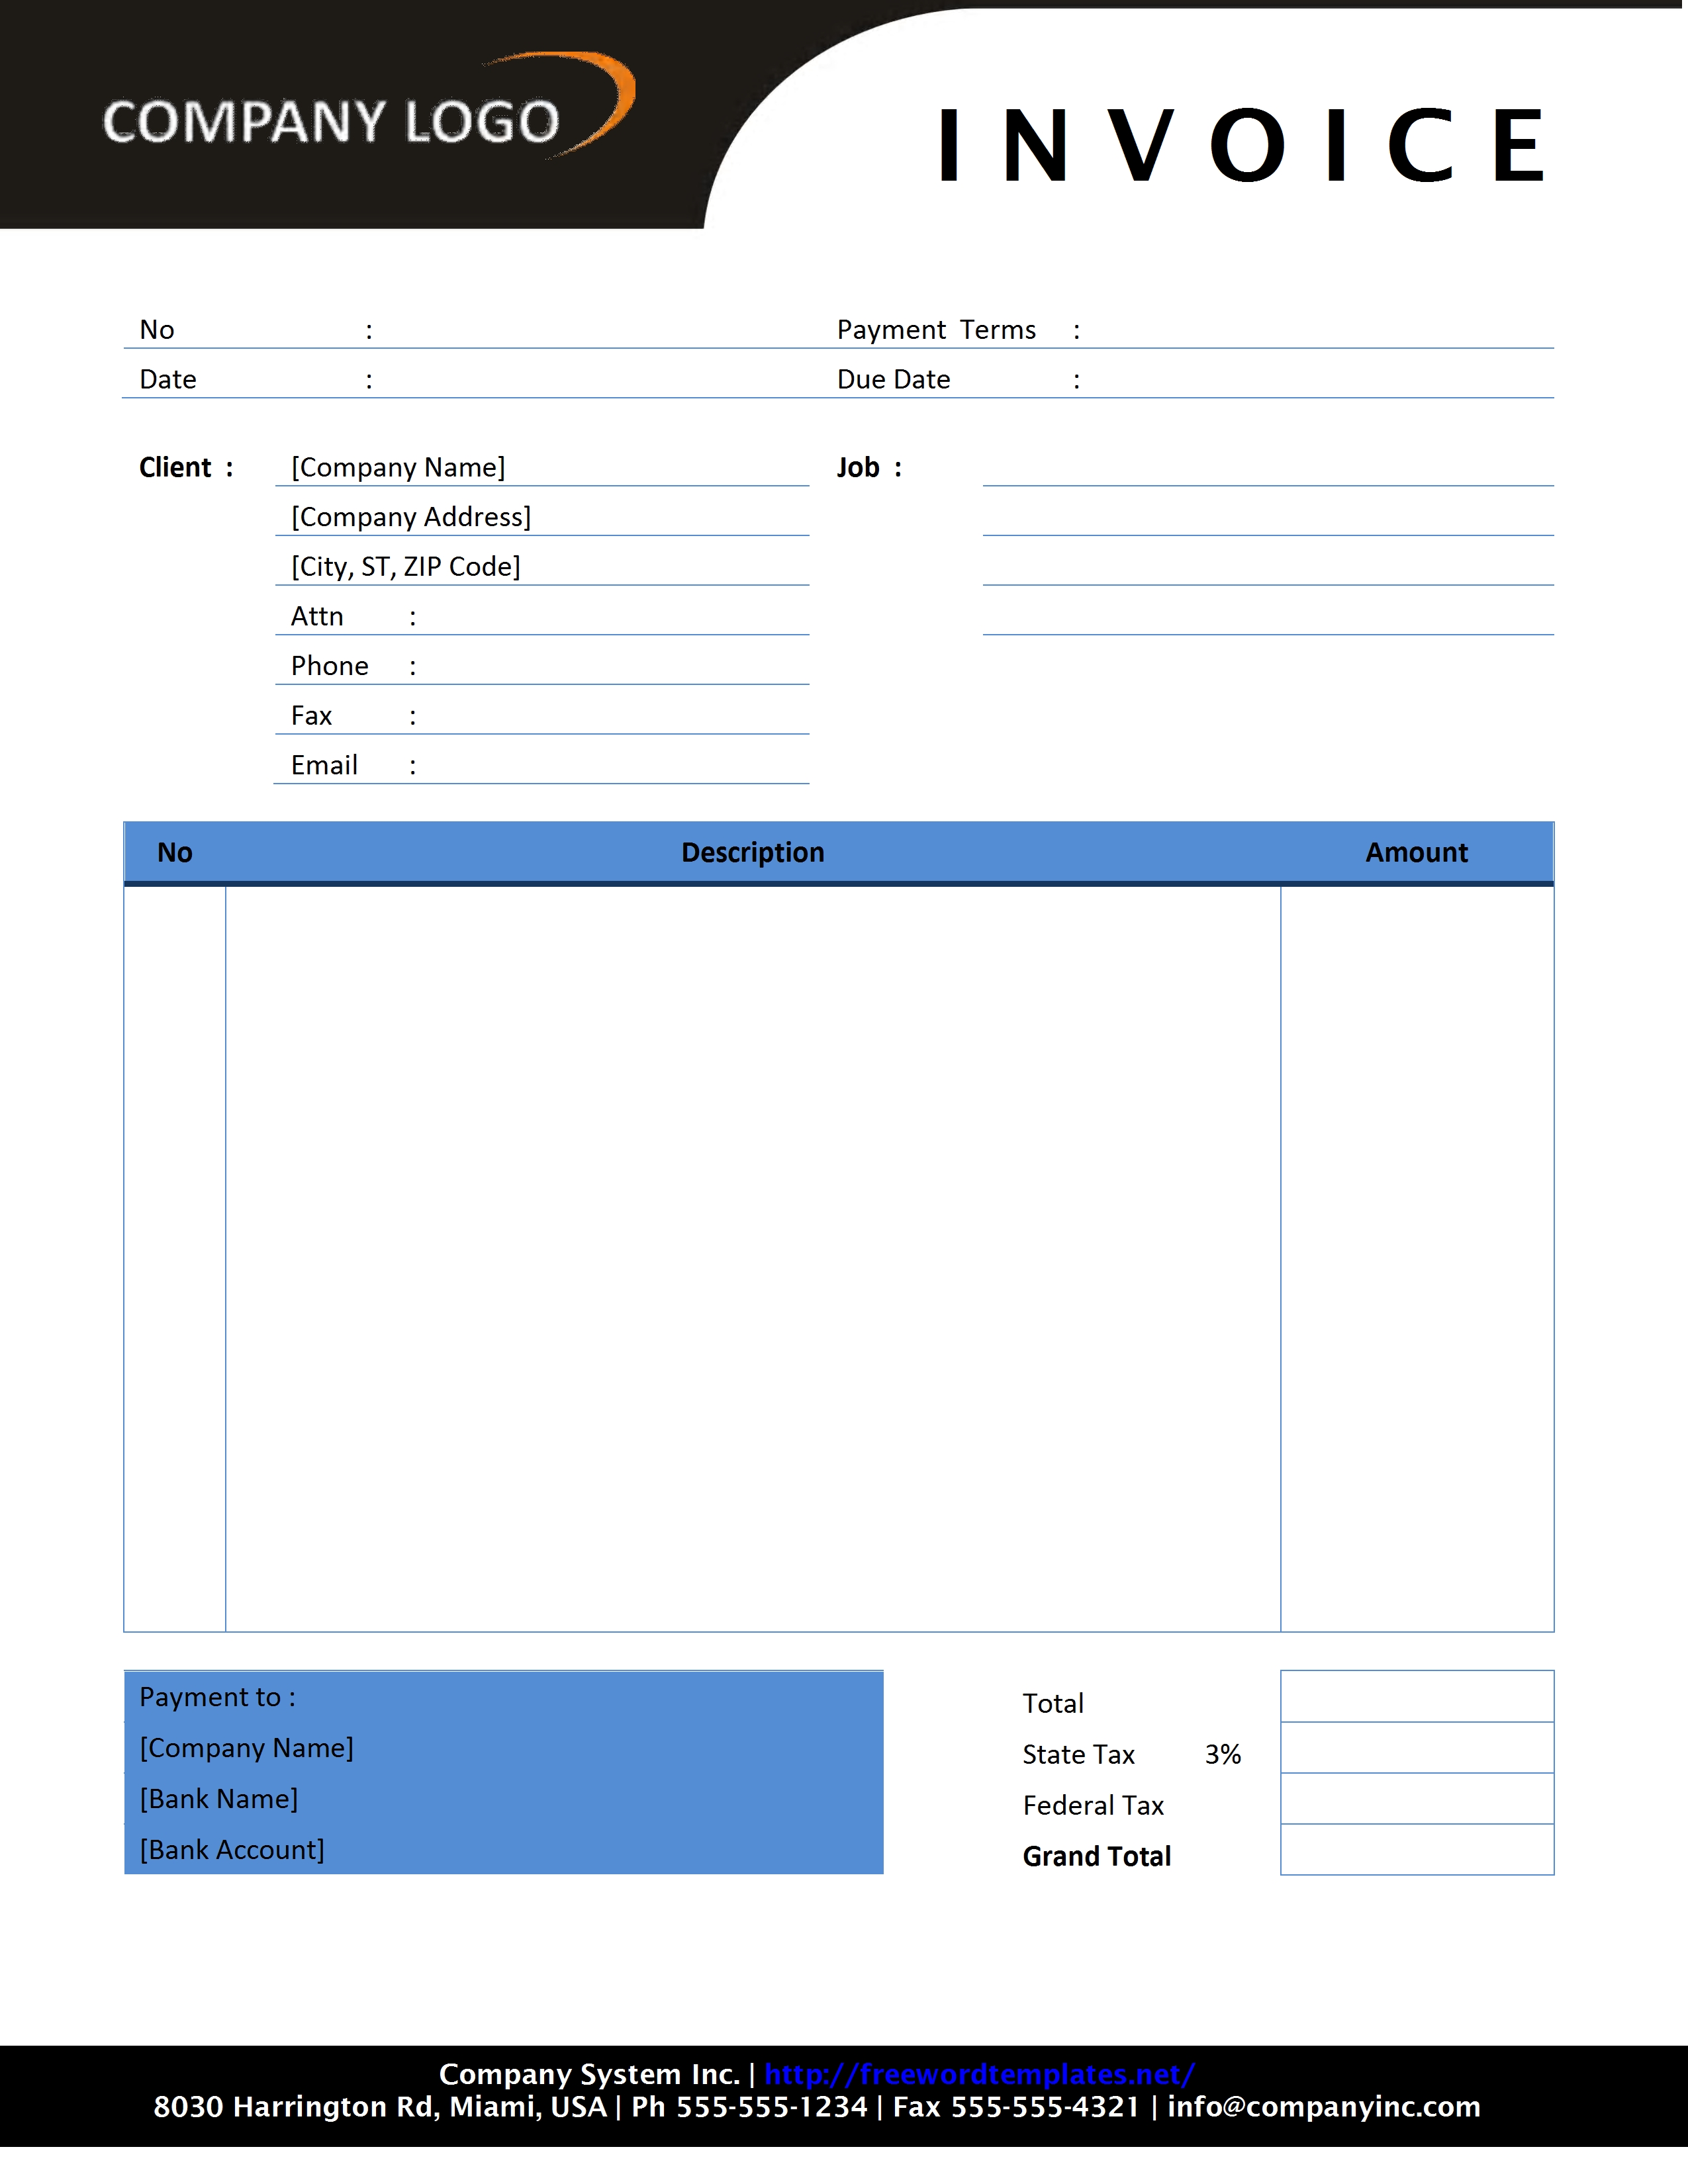 Contractor Invoice Template   Free Microsoft Word Templates  freelance contractor